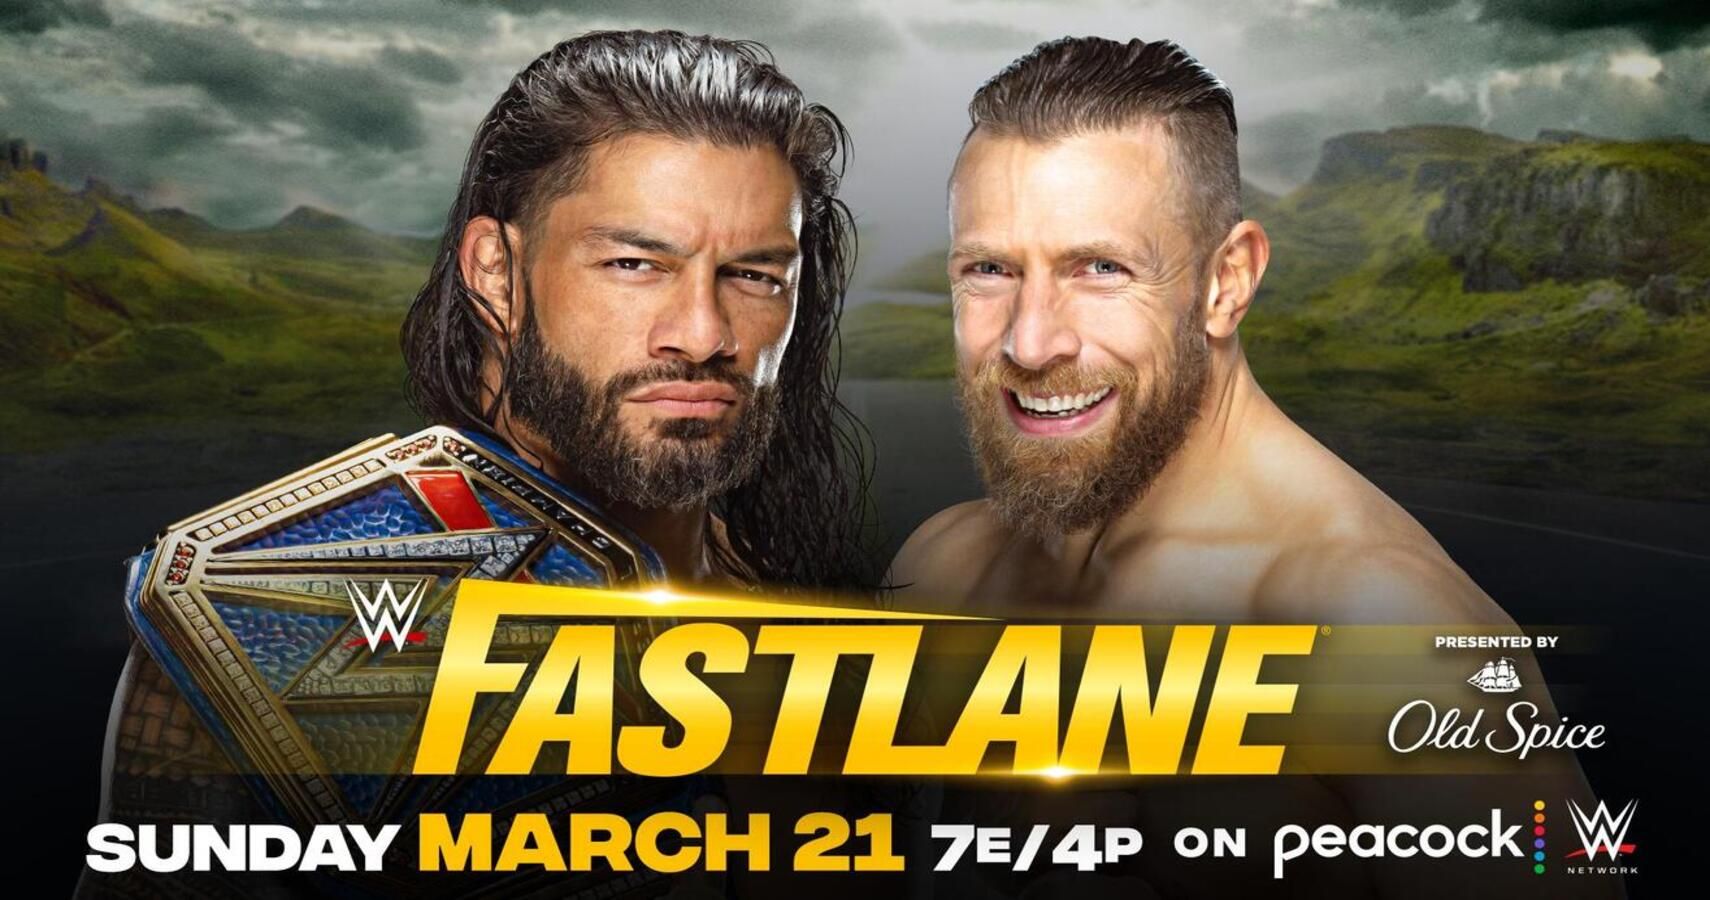 Latest Betting Odds For Fastlane Matches Revealed